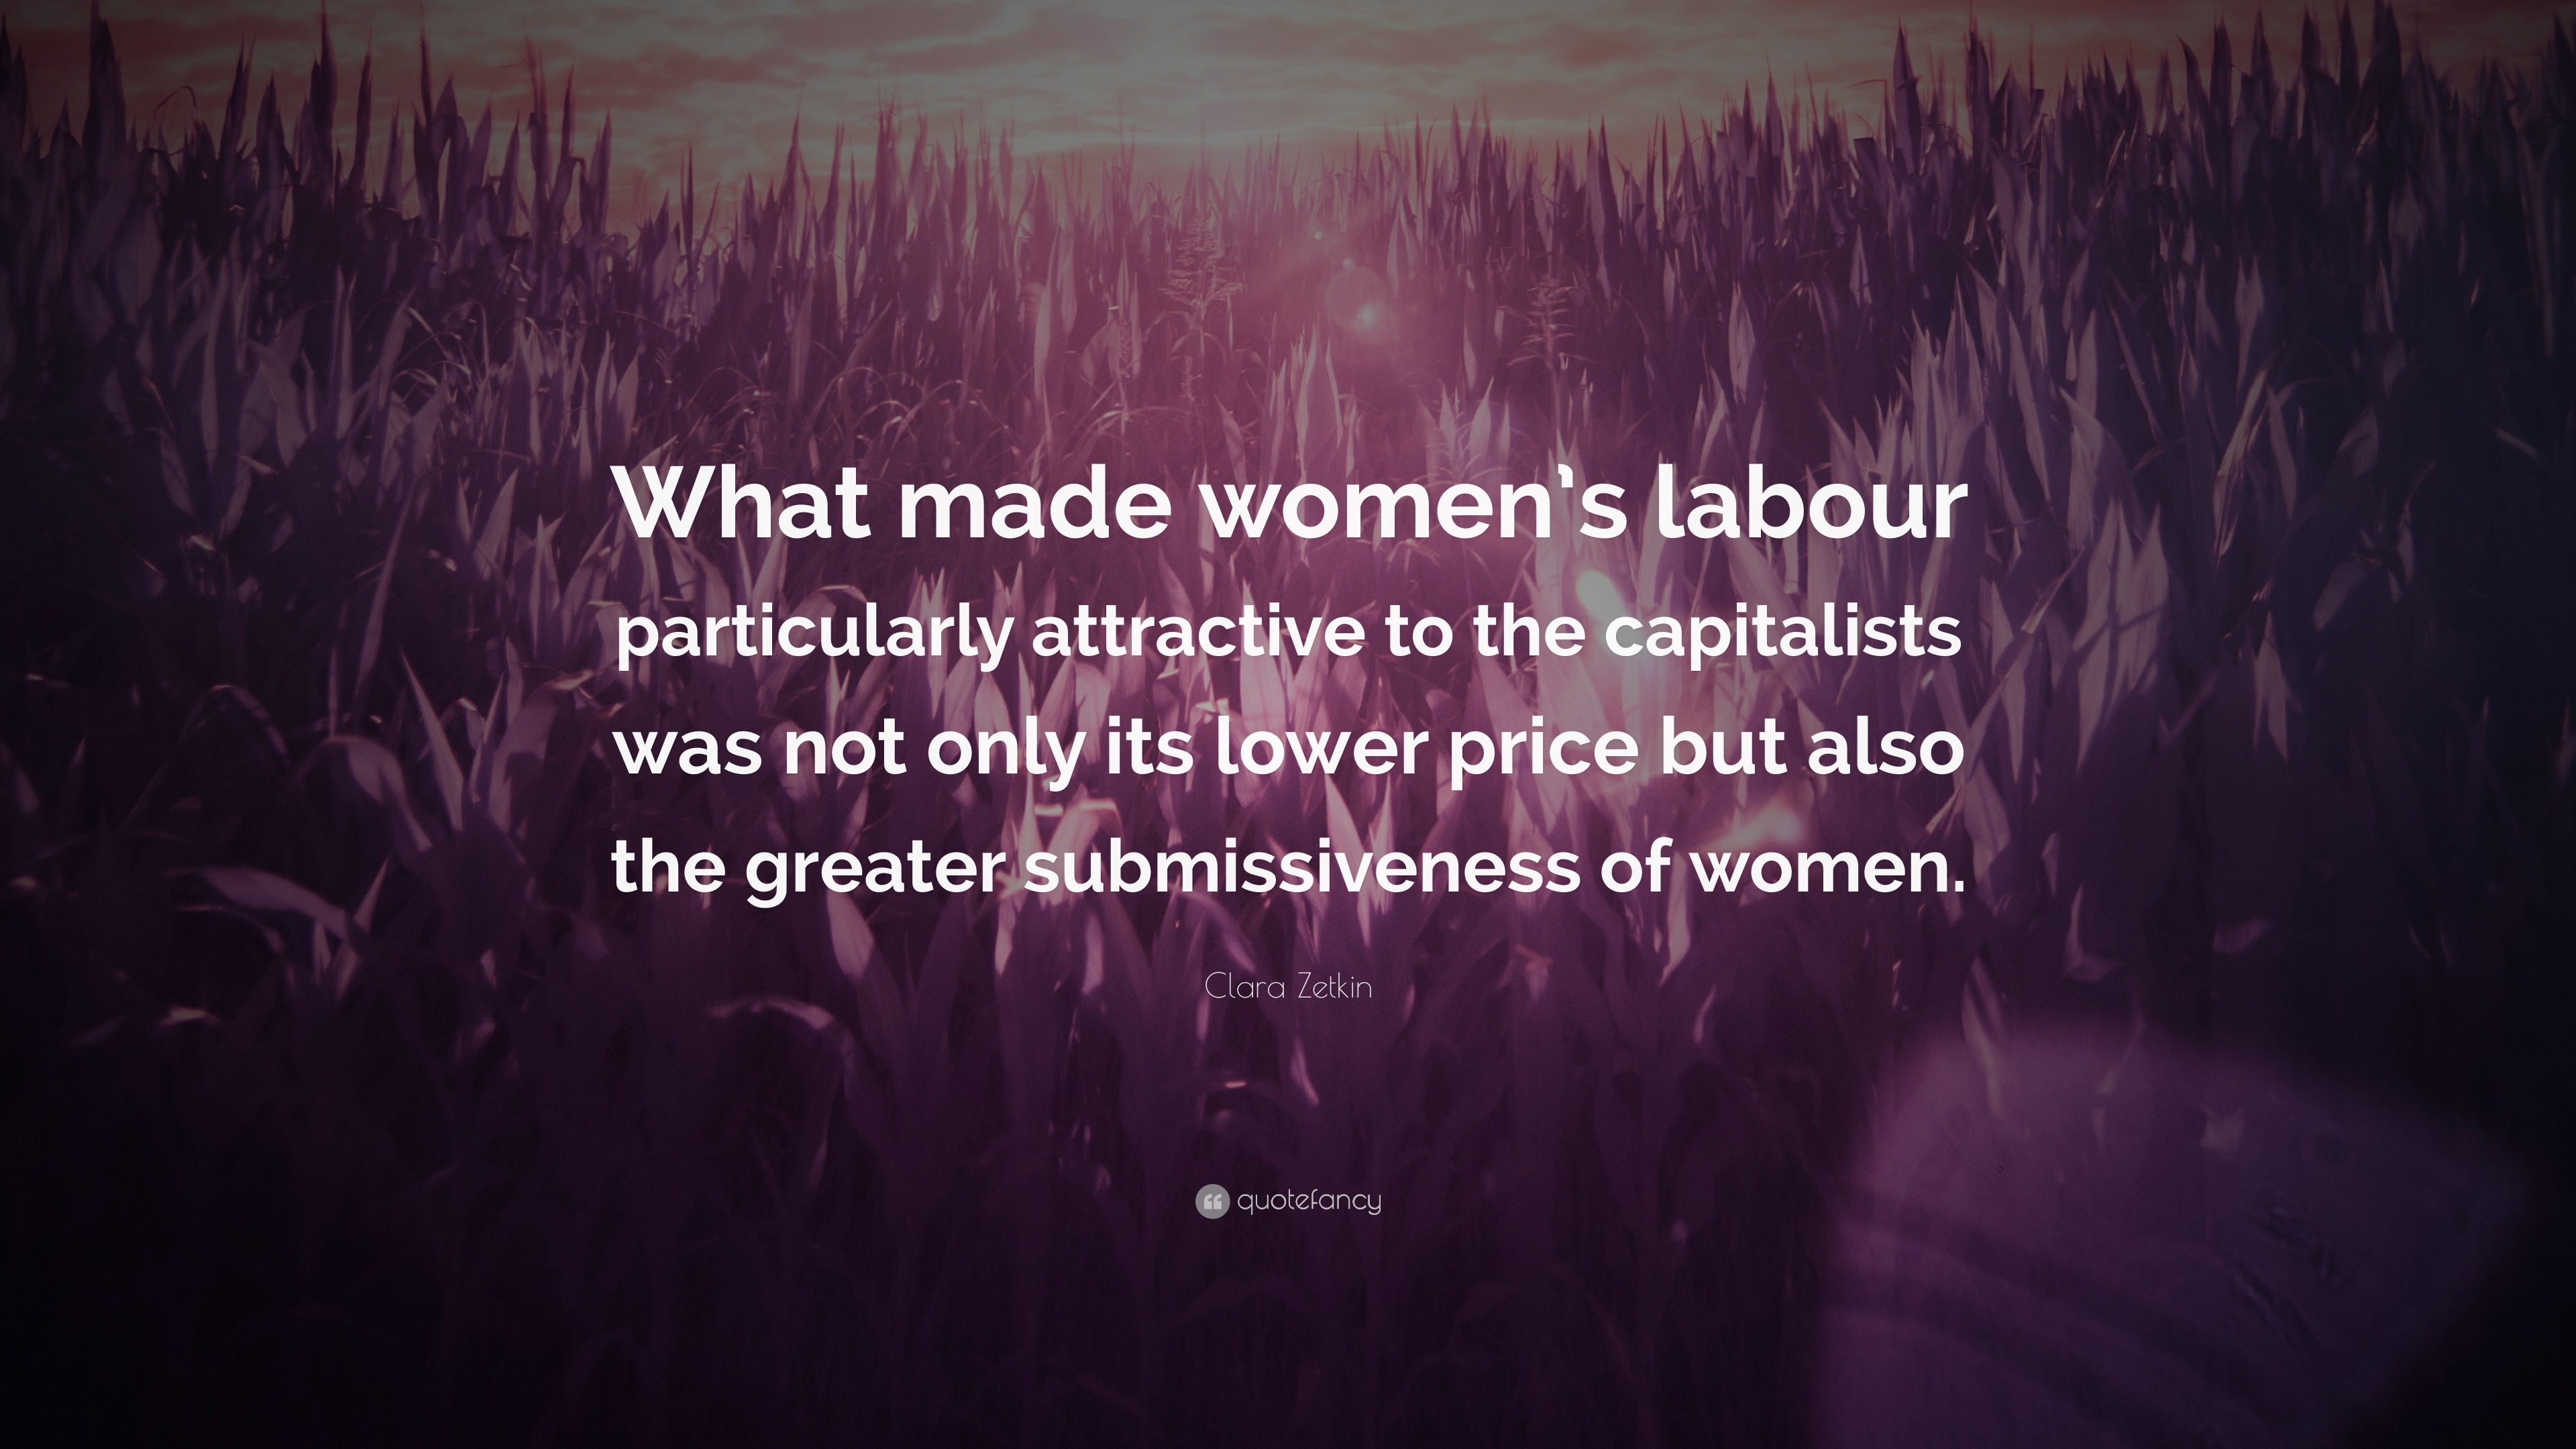 Clara Zetkin Quote: “What made women’s labour particularly attractive ...